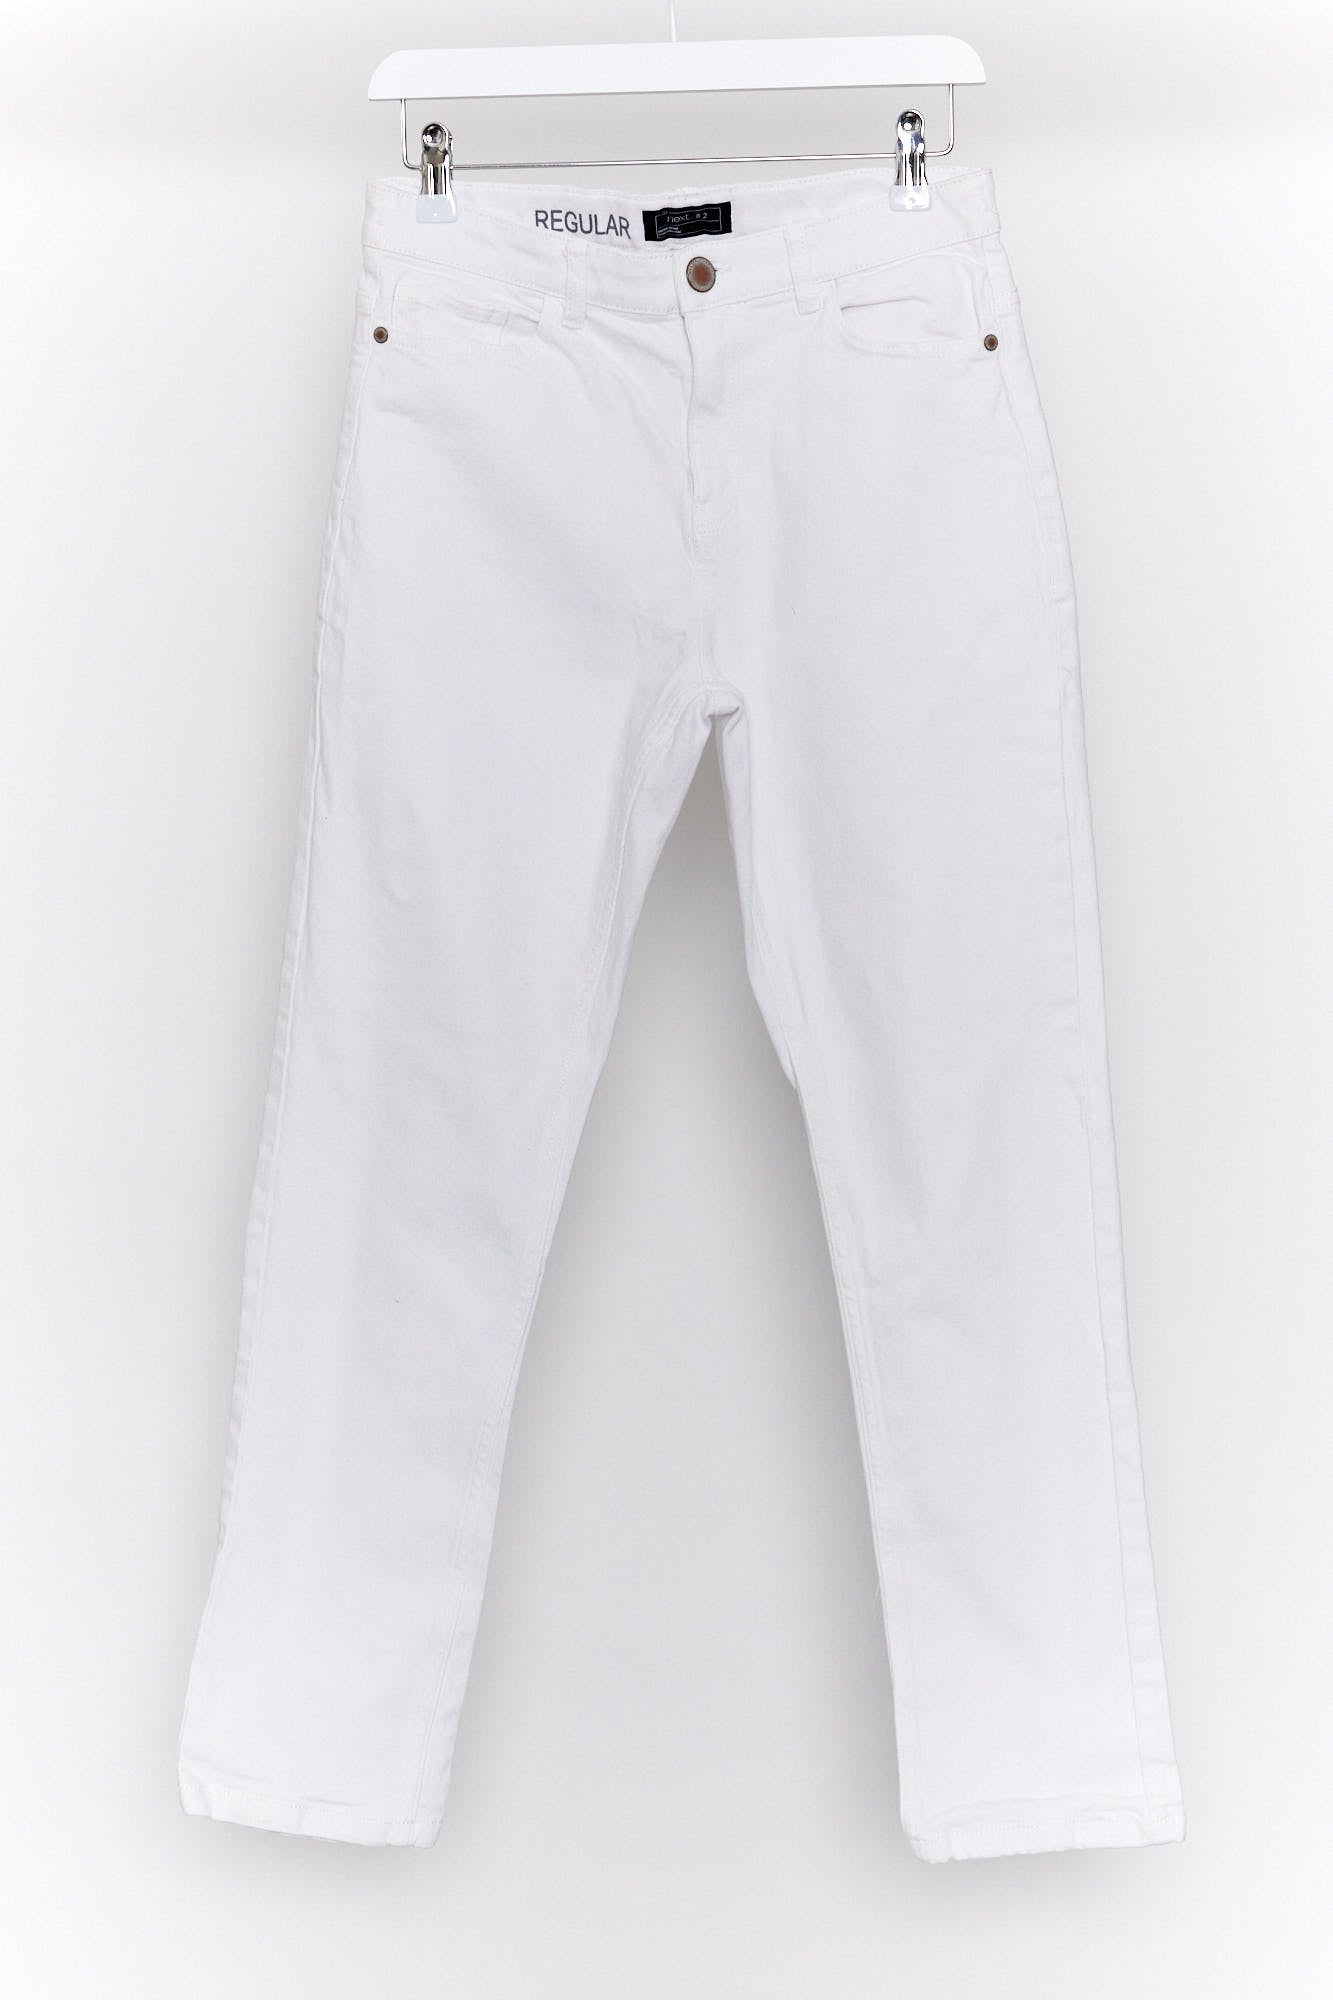 Next white jeans size 28" waist or small